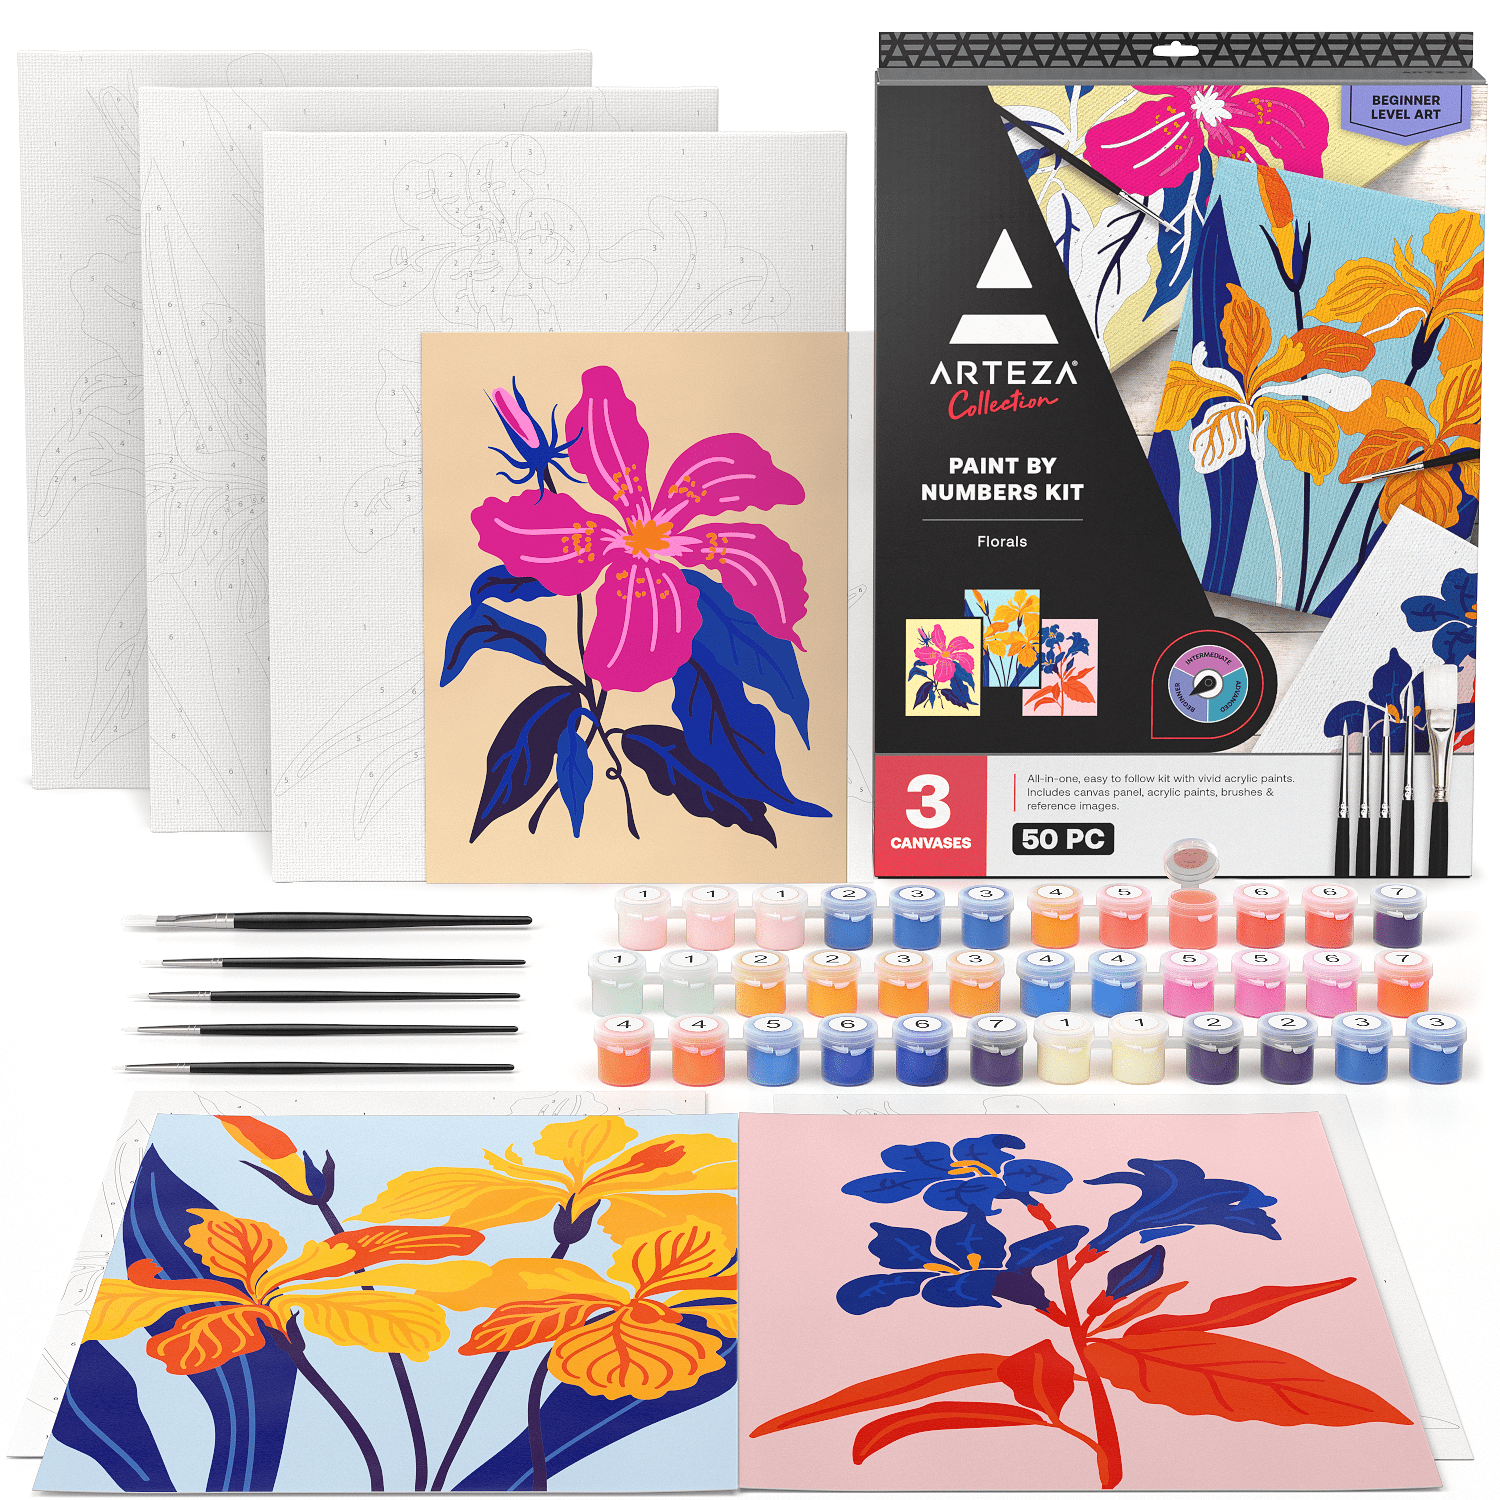 Paint by Numbers Kit by Violet Van Gogh- Polished Peacock Has Everything You Need to Paint! Unisex and for All Ages!